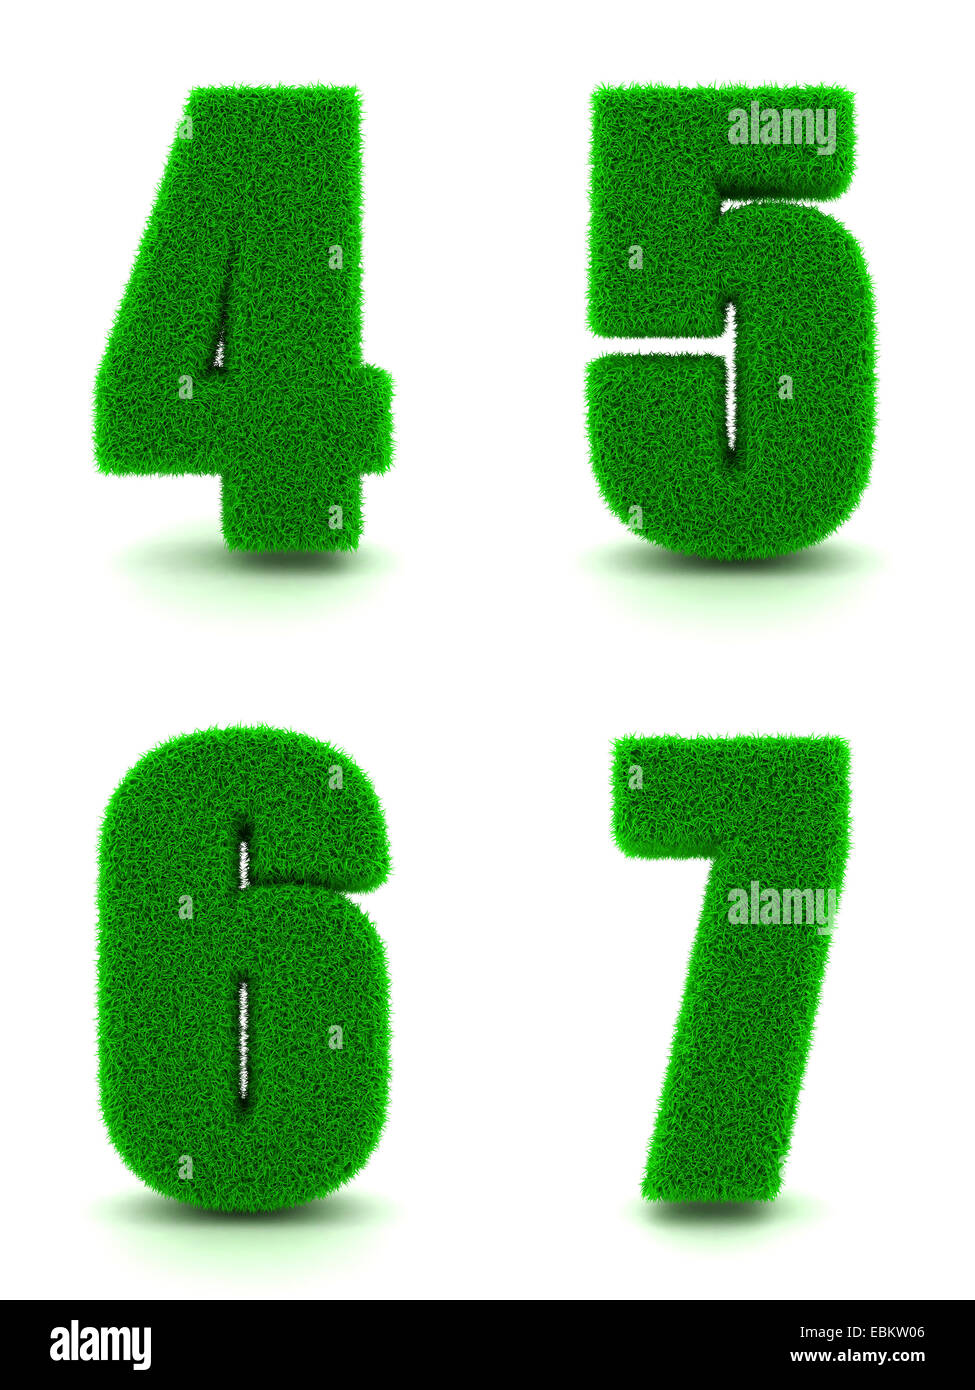 Digits 4, 5, 6, 7 - Set of Green Grass on White Background in 3d. Stock Photo